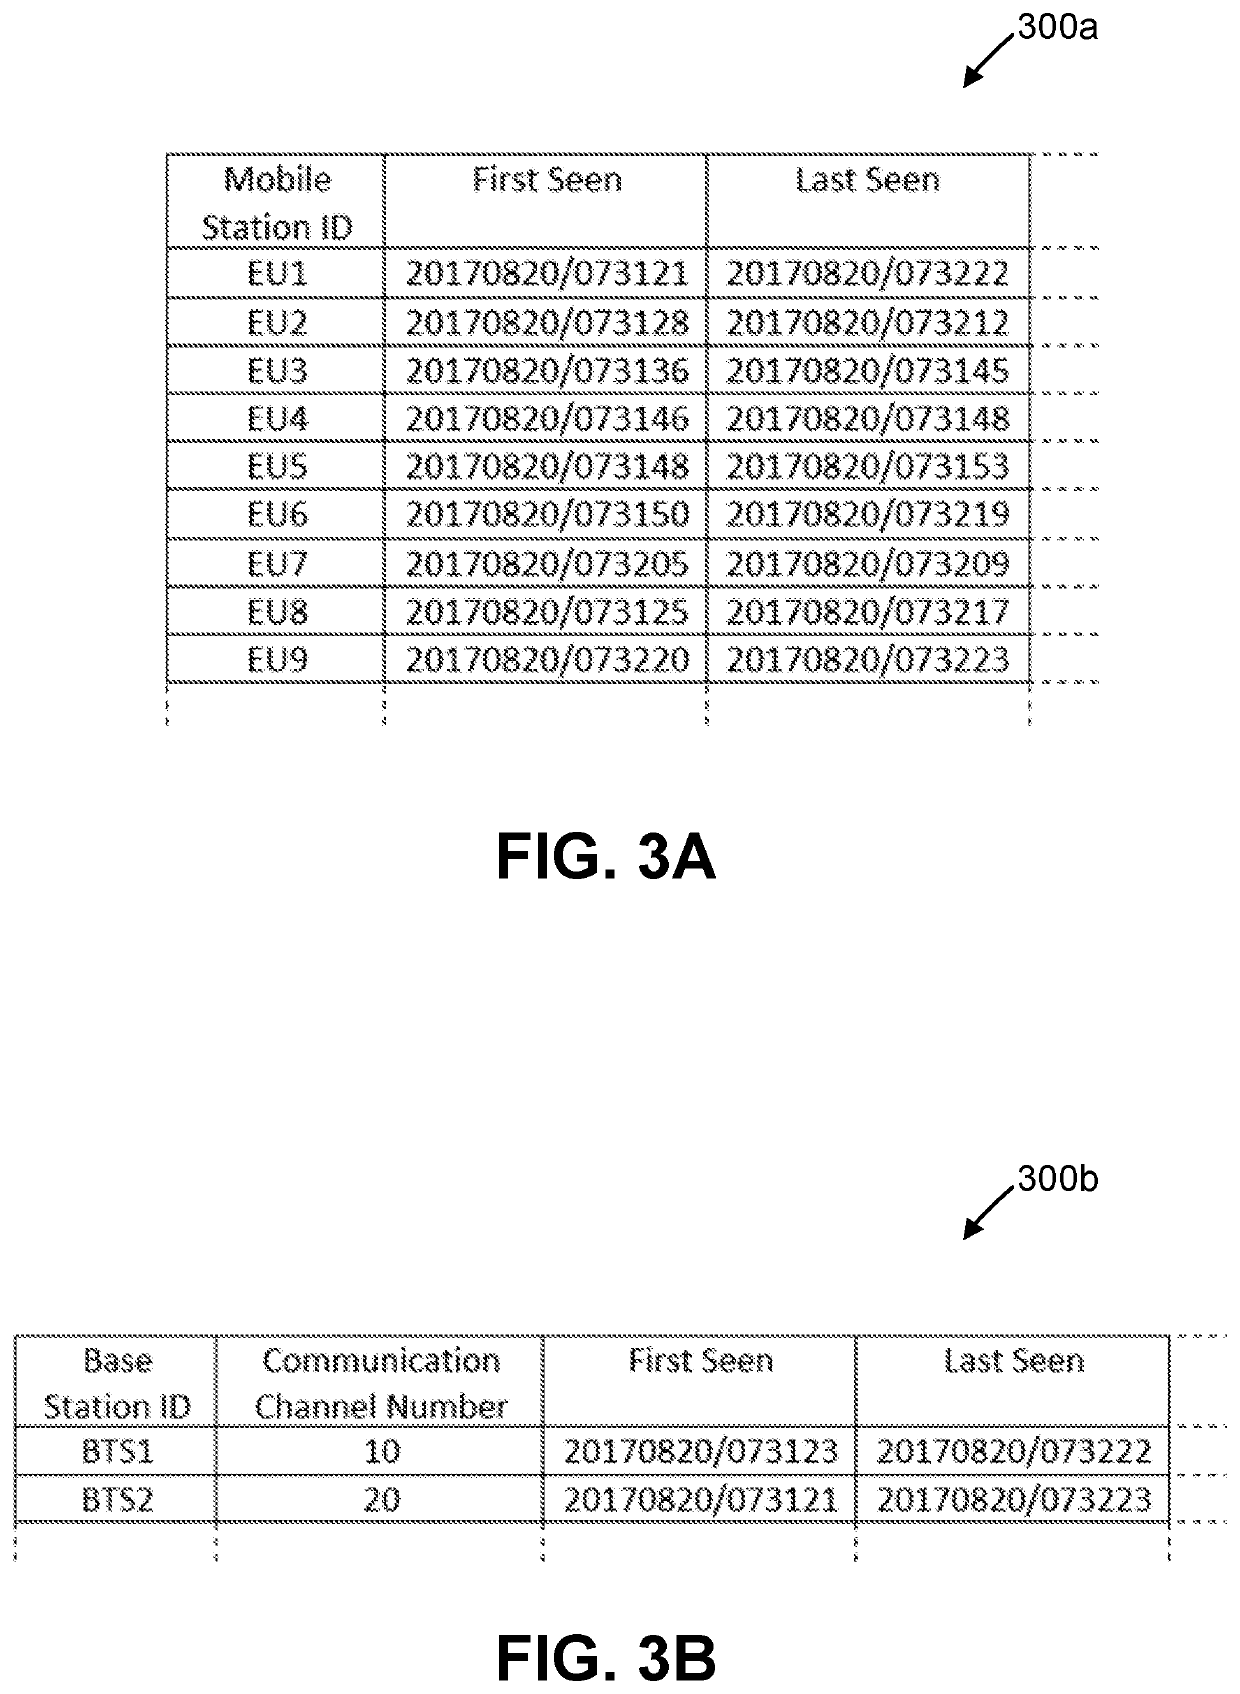 Paired-timing connectivity event handling in a wireless communications network